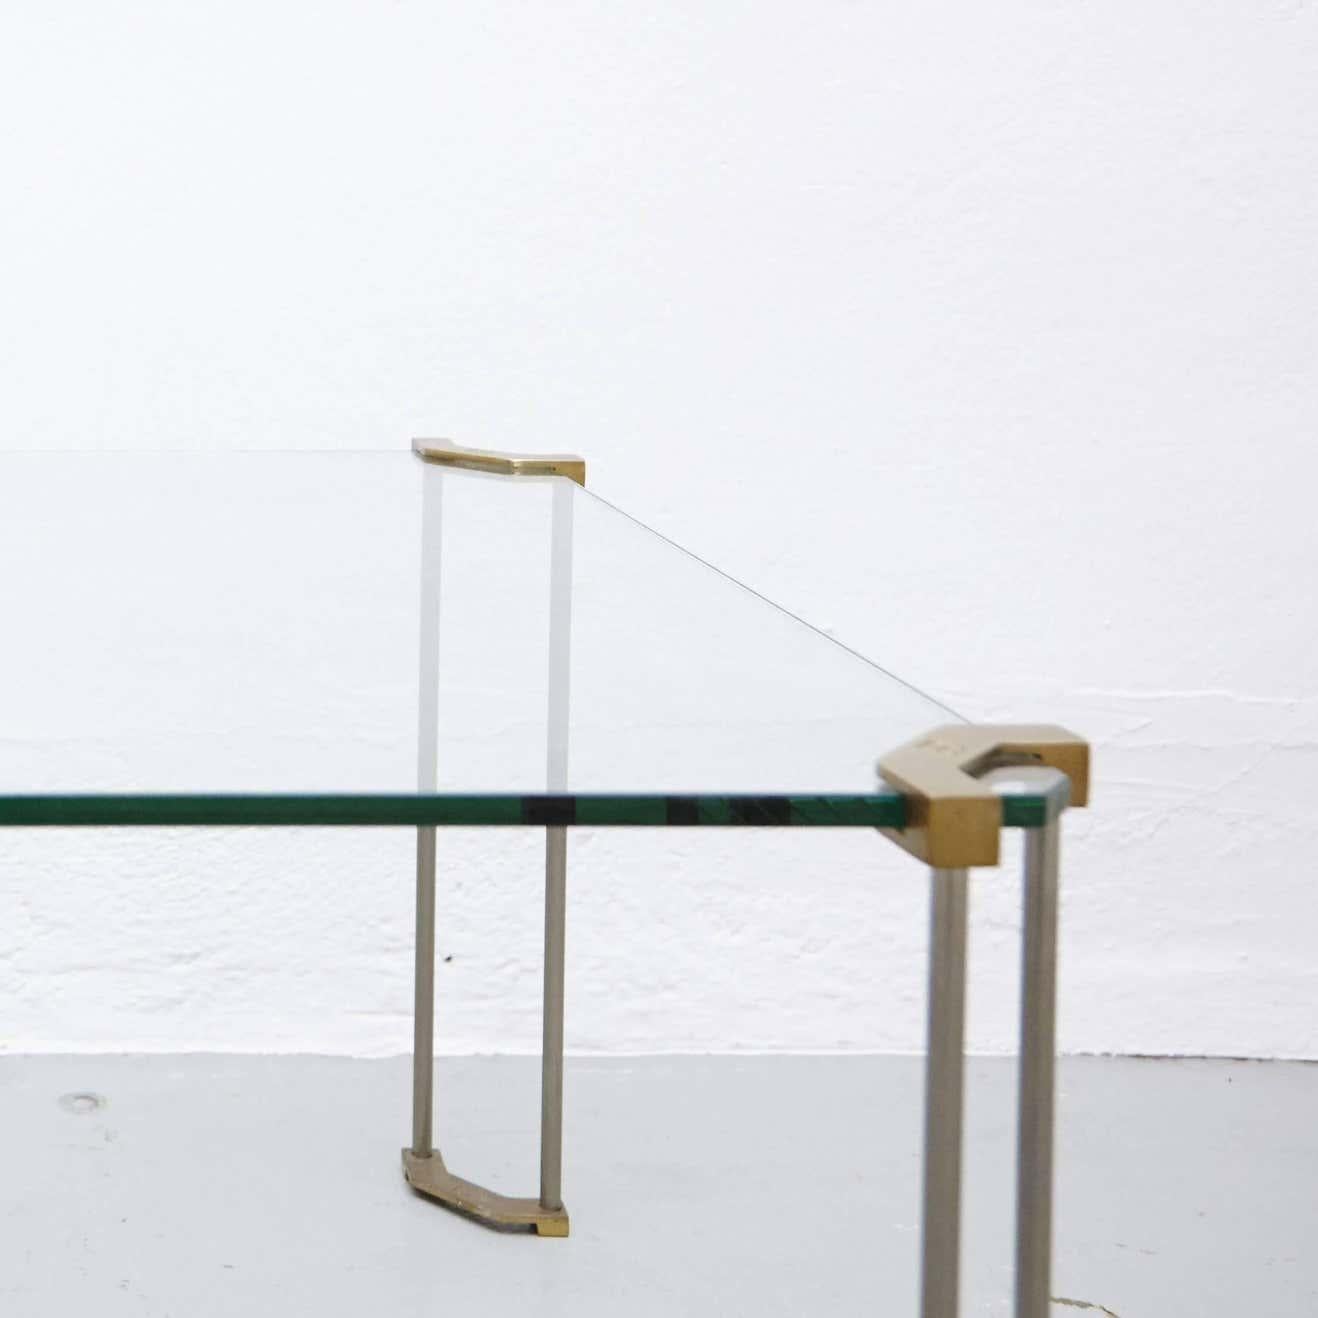 The table is made from glass and sand casted brass. The legs are hand casted by very skilled craftsmen in the Netherlands. The brass has typical characteristics of the casting process and only some parts are polished.

After the Hungarian